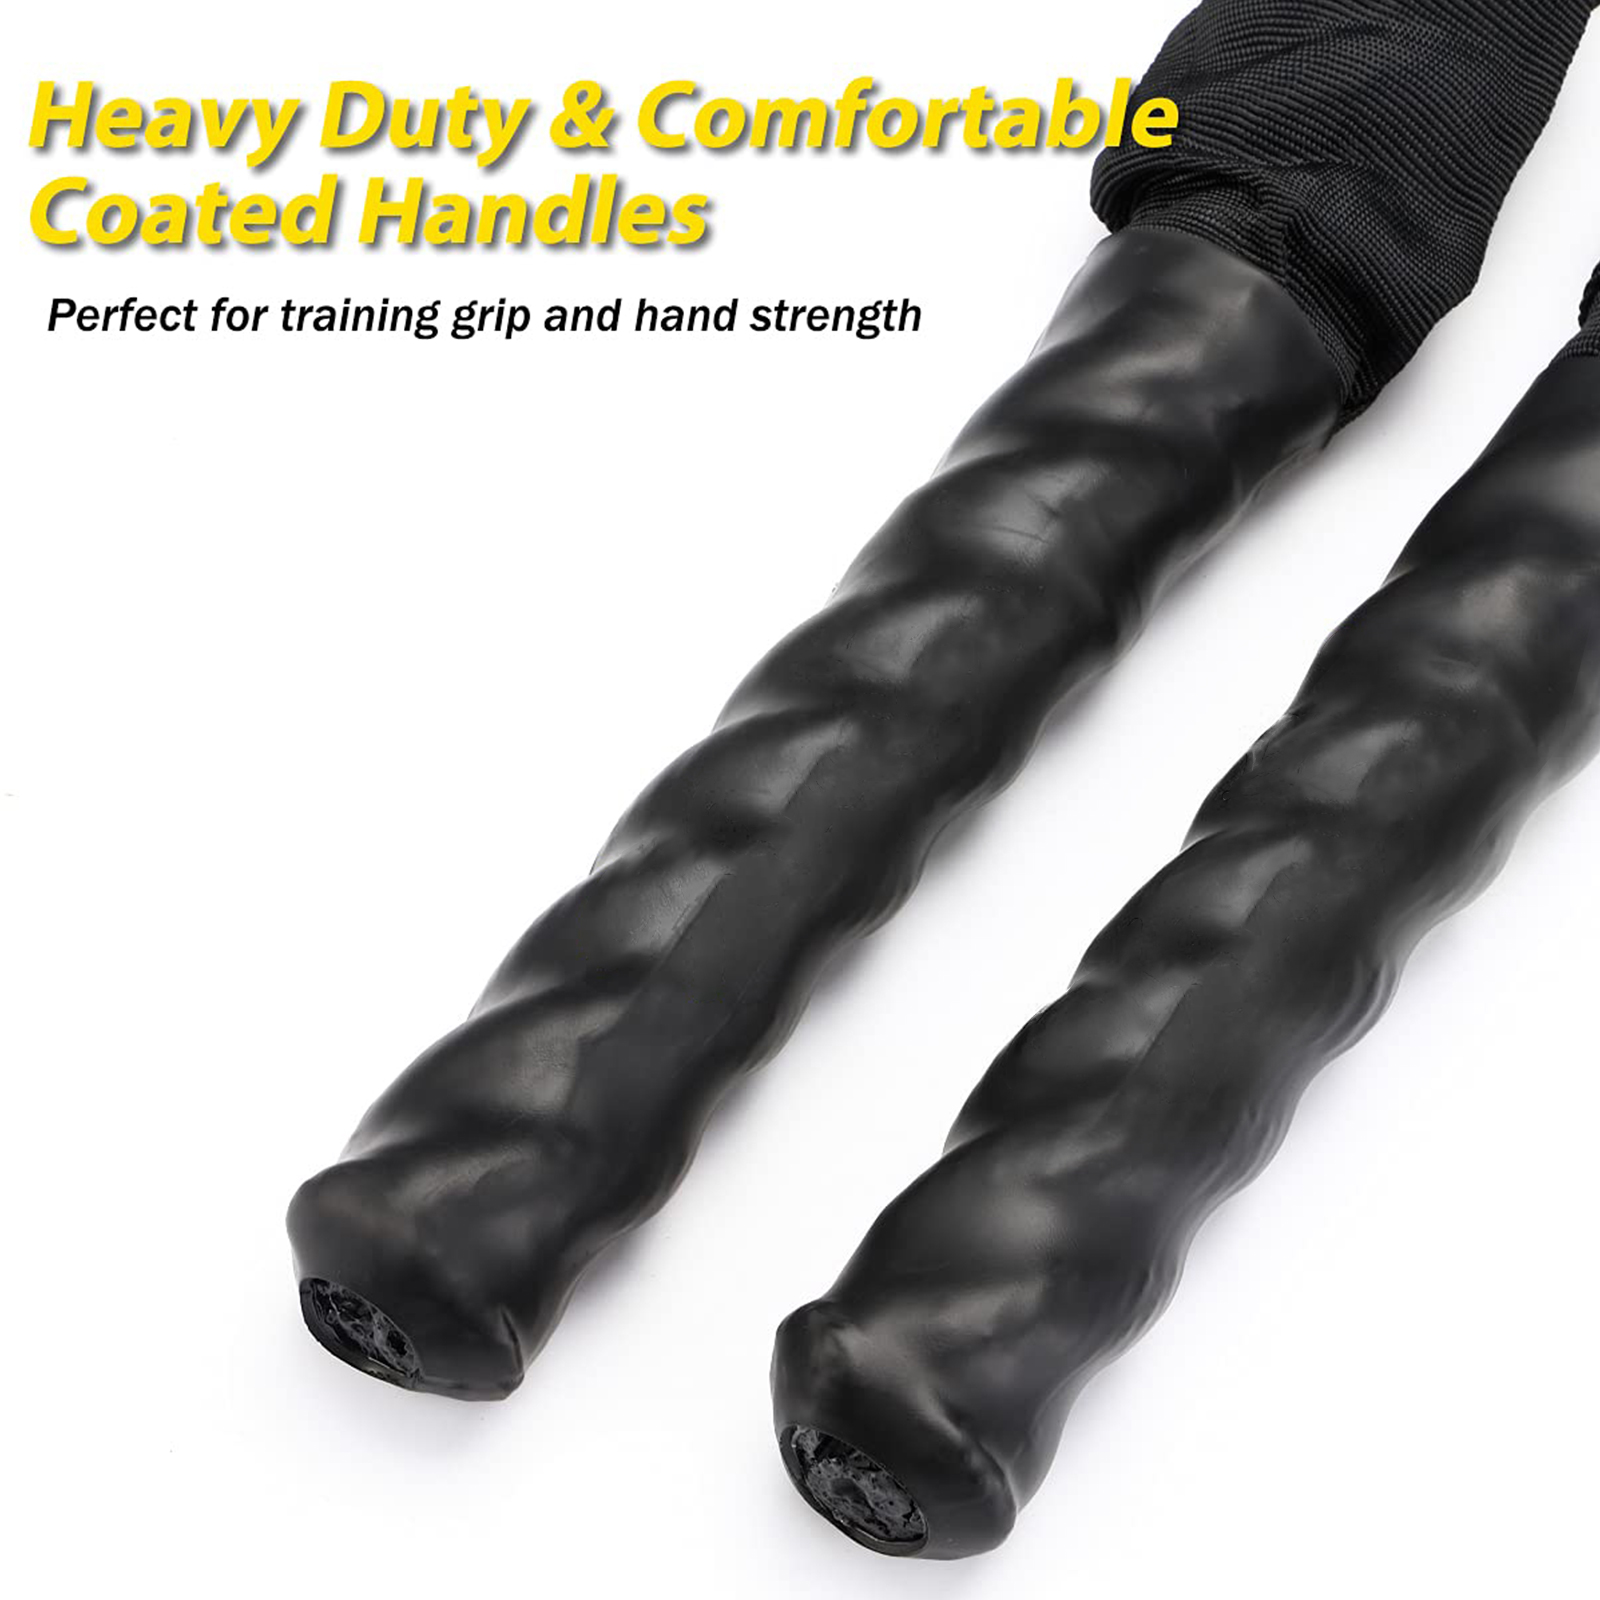 1.5inch Heavy Exercise Training Rope 30ft Length,Heavy Battle Rope for Strength Training - image 3 of 9